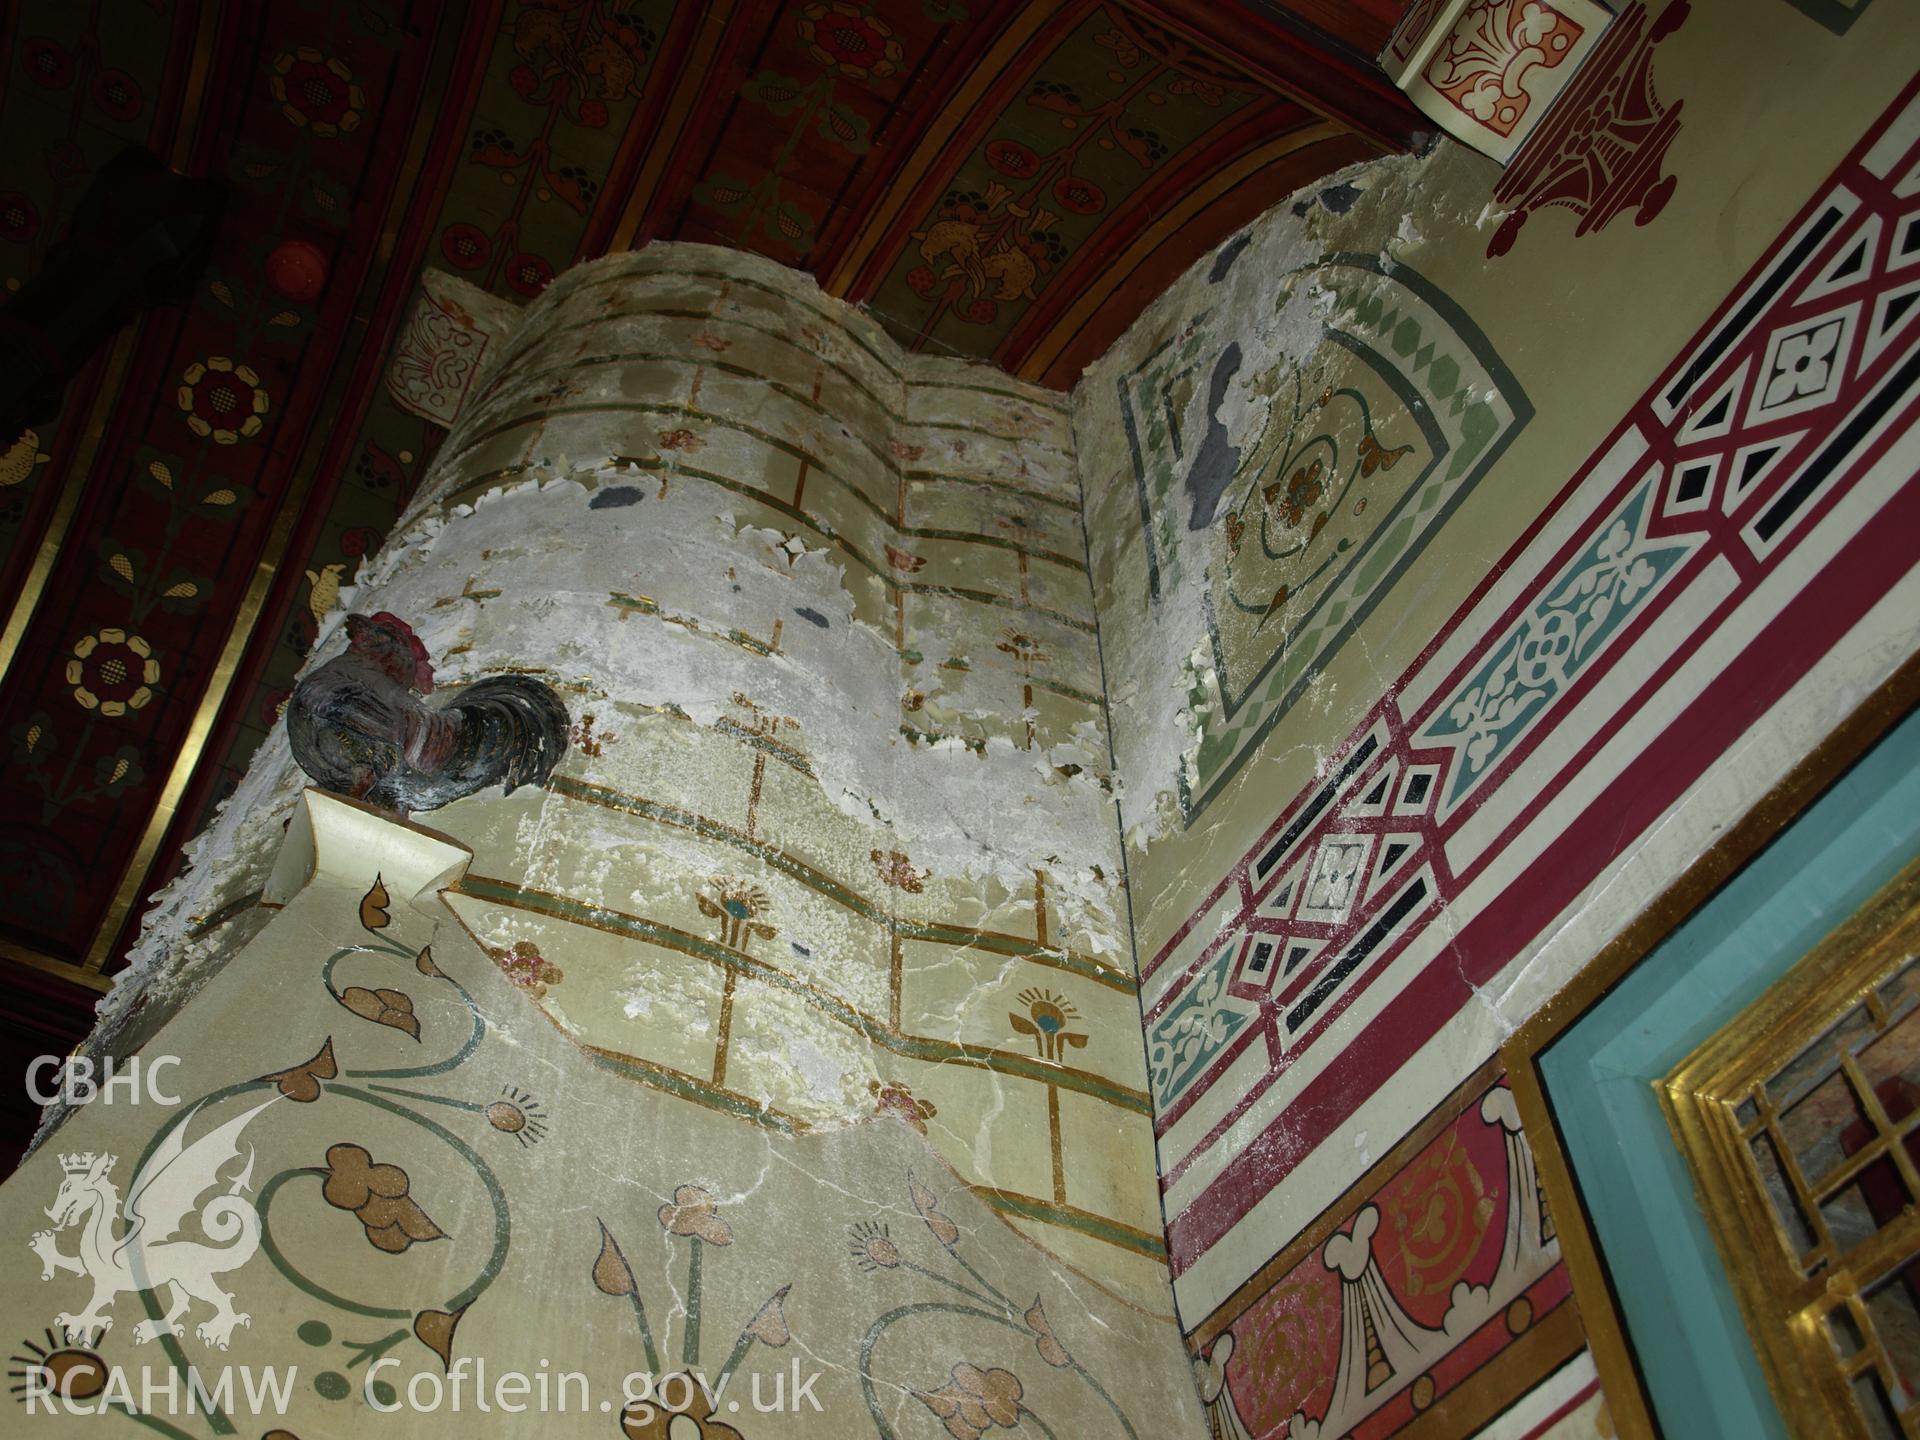 Highly decorated wall in Lord Bute's Bedroom at Castell Coch, 1/4/2019. From "Castell Coch, Tongwynlais, Cardiff. Archaeological Building Investigation & Recording & Watching Brief" by Richard Scott Jones, Heritage Recording Services Wales. Report No 202.